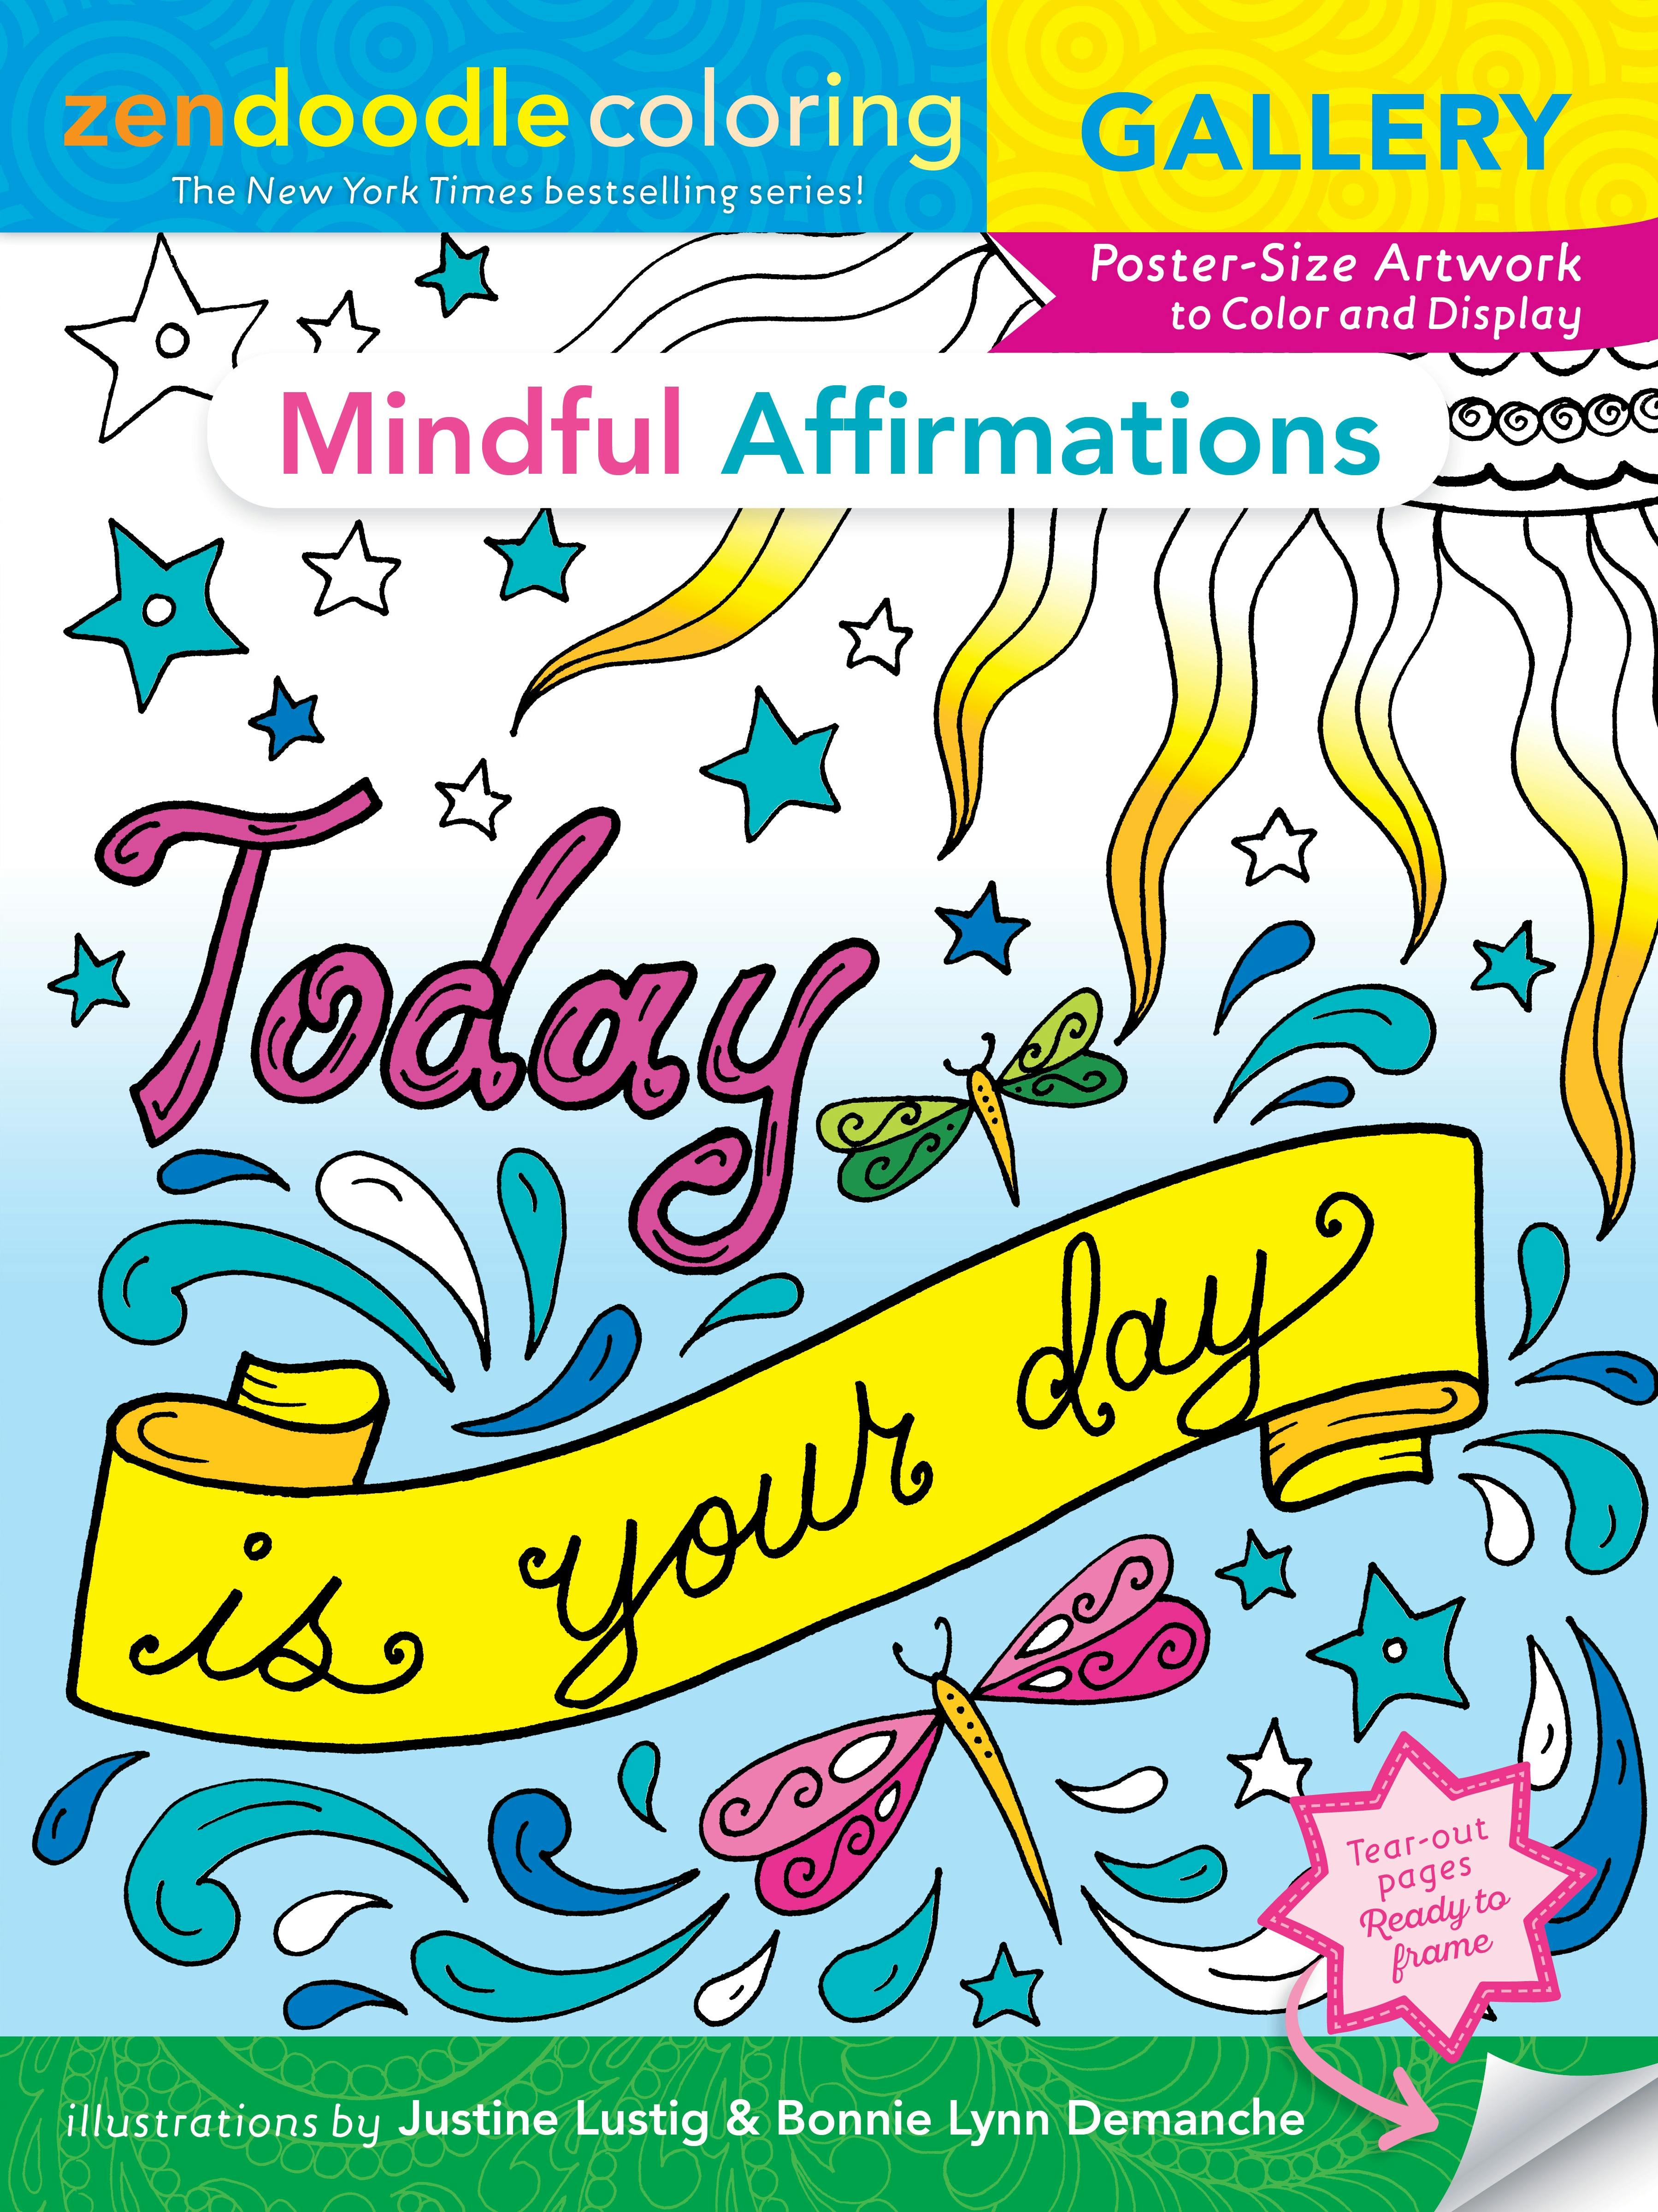 Image of Zendoodle Coloring Gallery: Mindful Affirmations